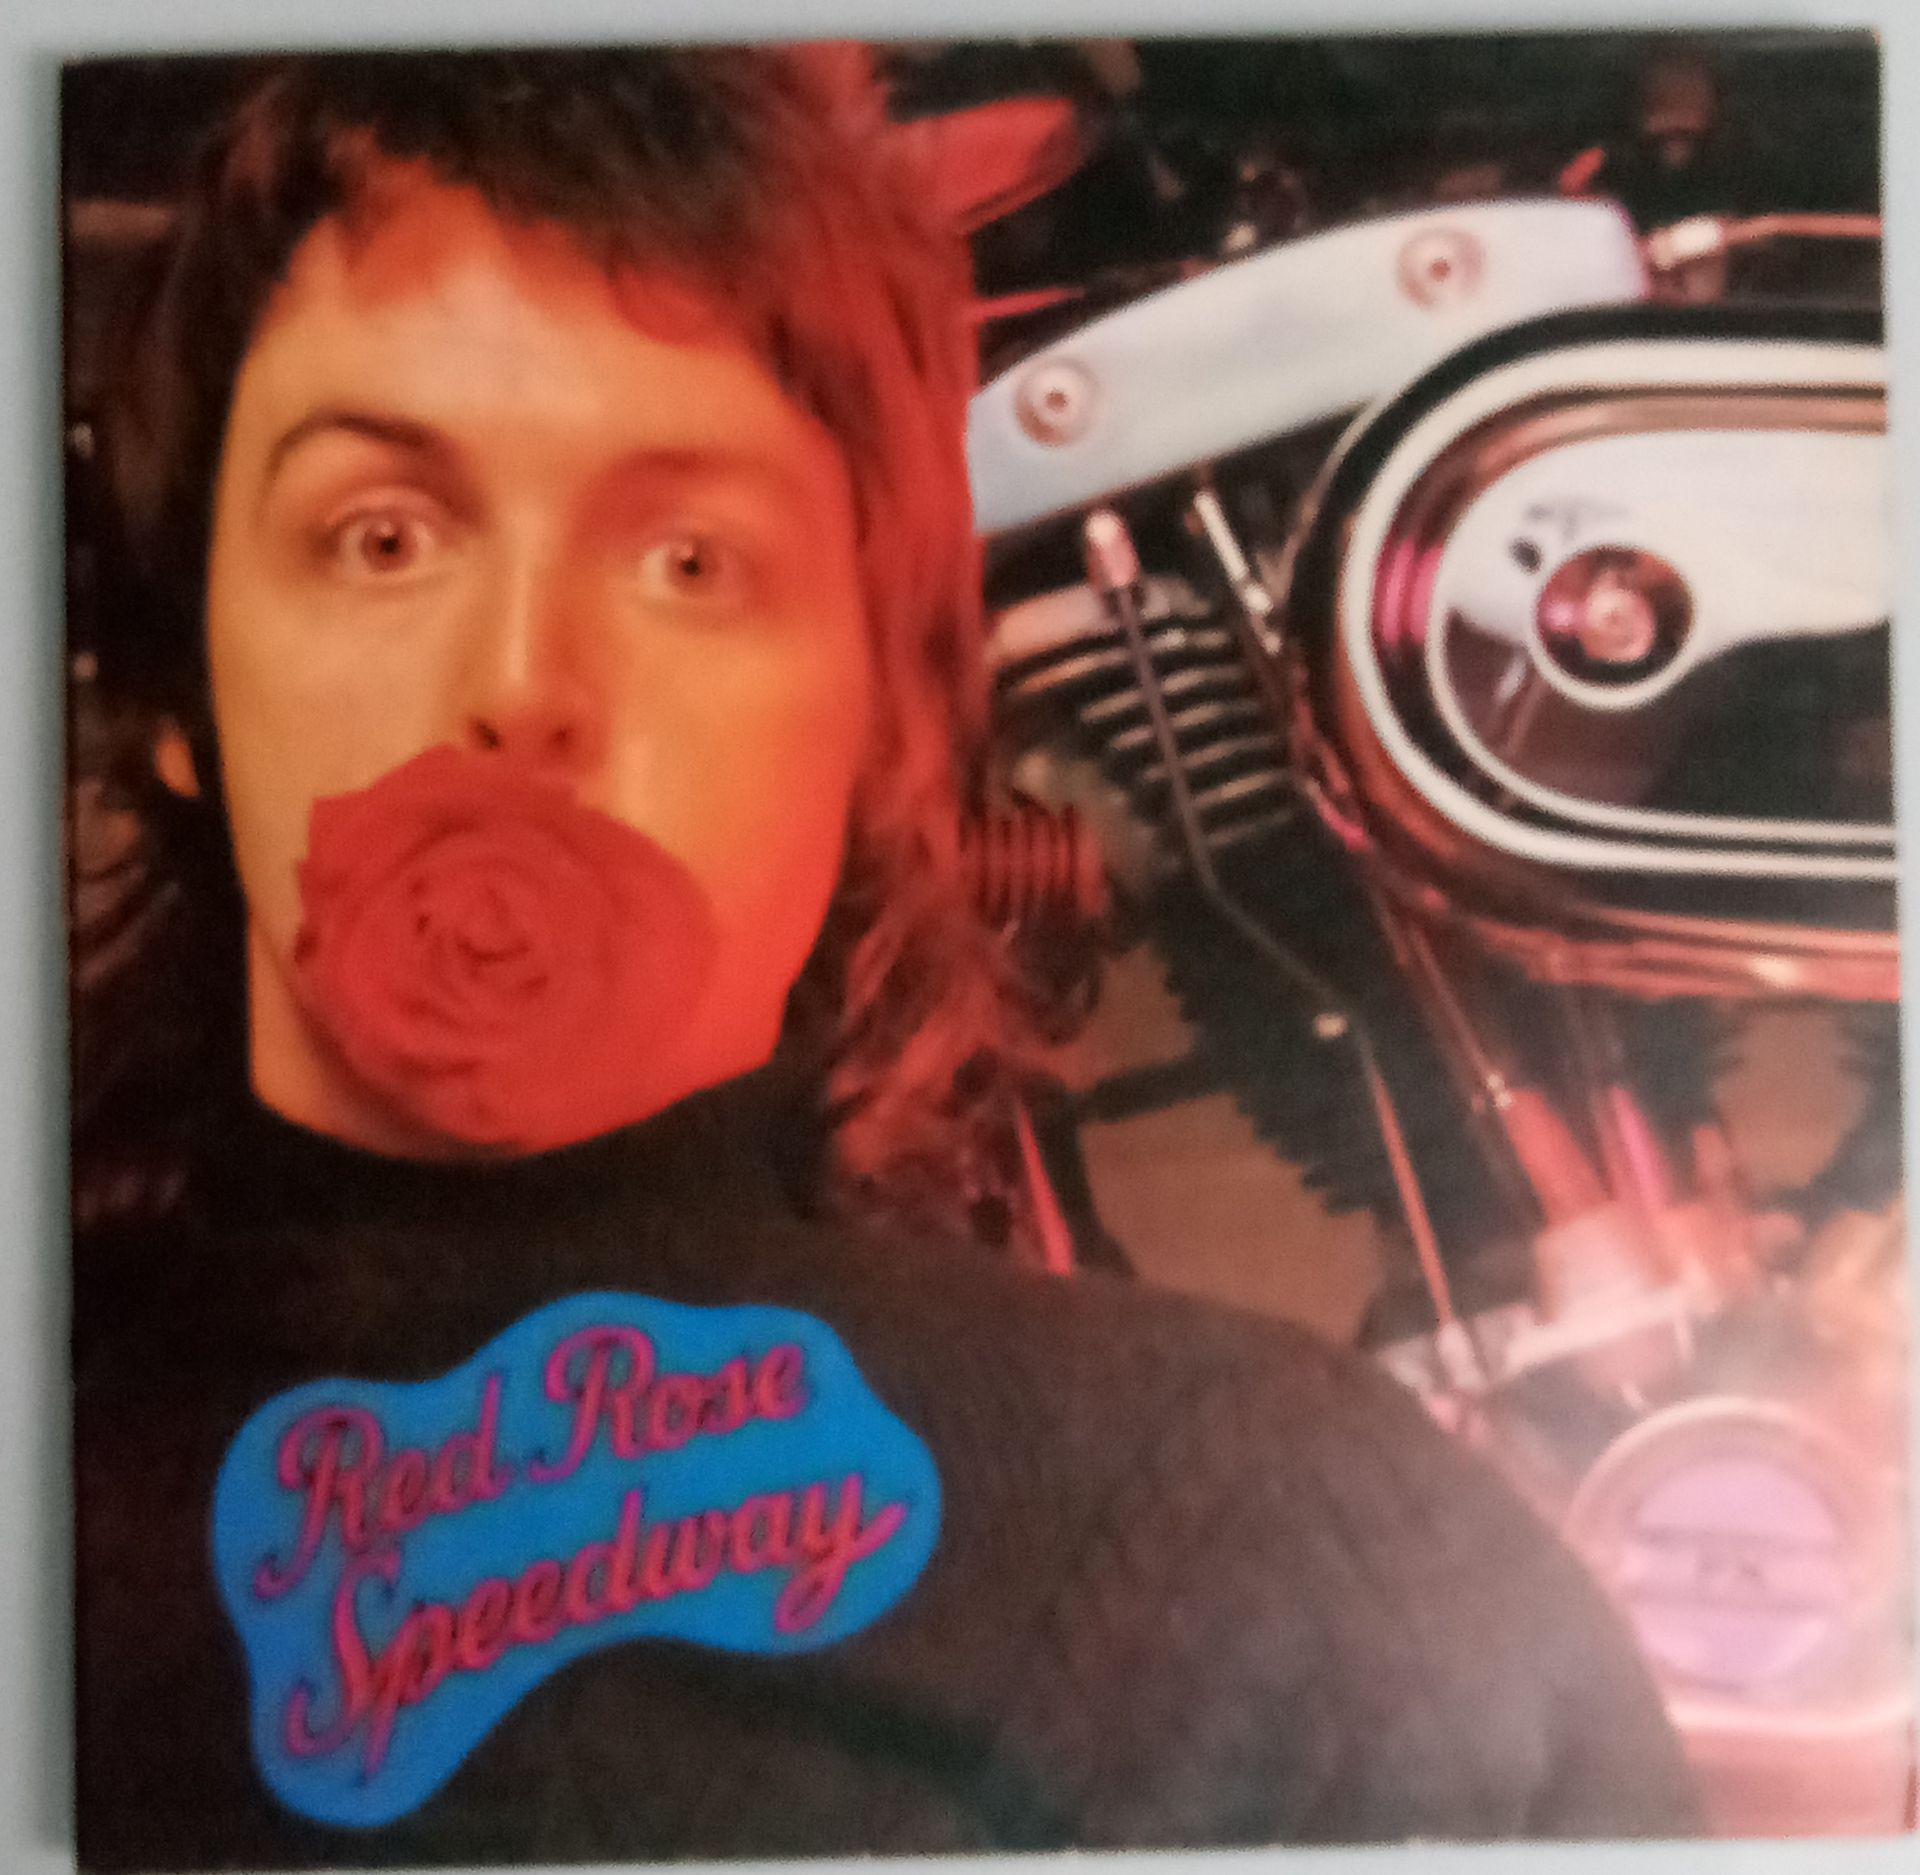 Sought after. Paul McCartney And Wings - Red Rose Speedway - 1973 - 12" Vinyl LP with booklet - Image 2 of 12